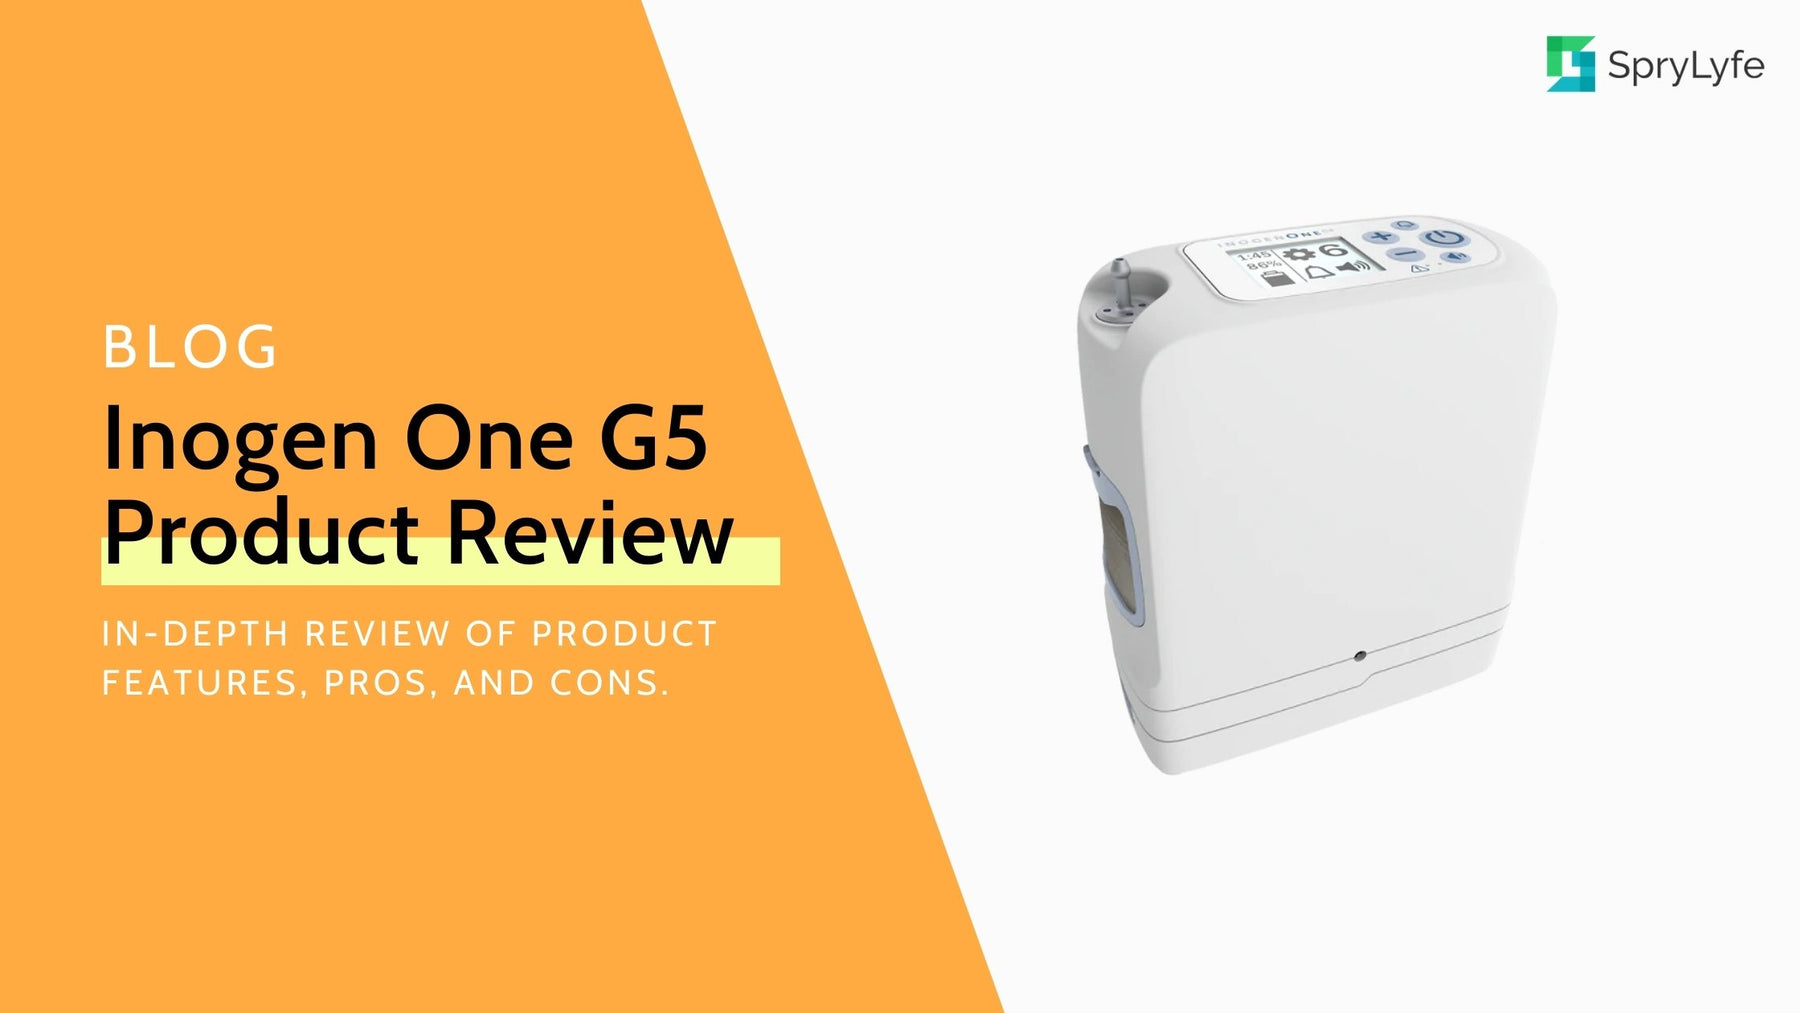 Inogen One G5 Portable Oxygen Concentrator Review